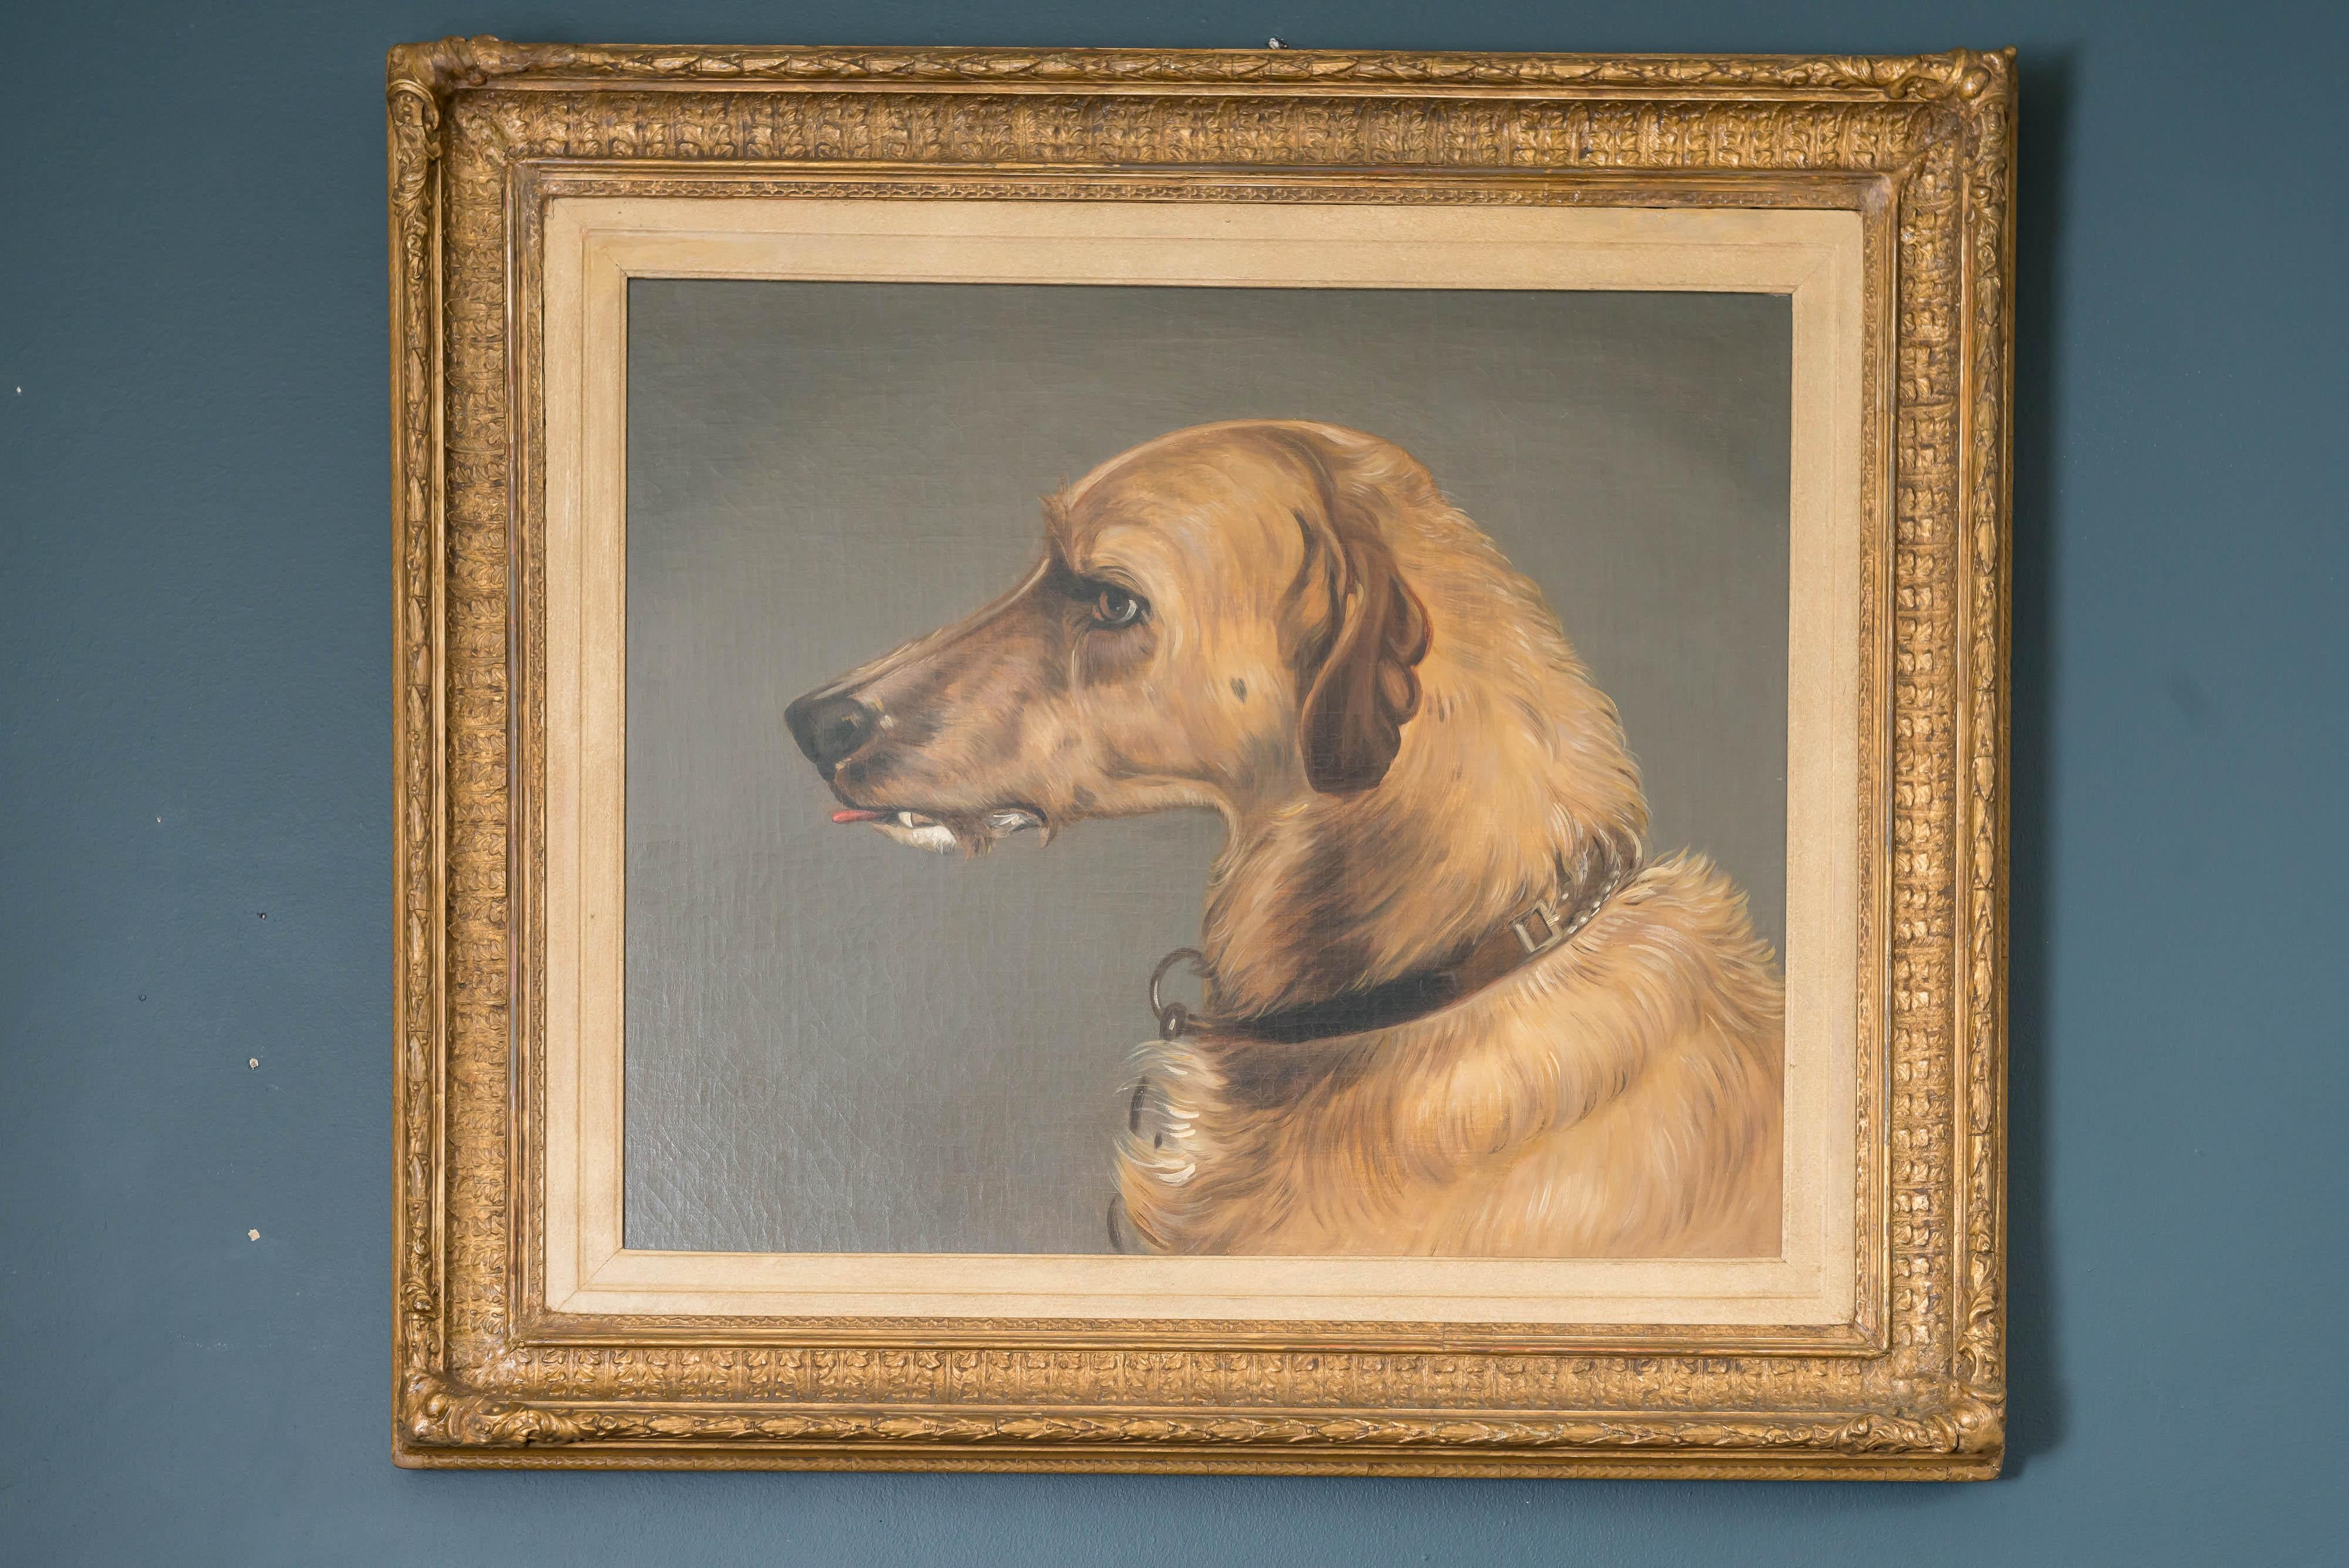 Fine 19th century English oil on canvas: Portrait of a dog, after Edwin Landseer. The verso photo documented, original canvas, Initialed W M May 1882. 
Based on a drawing of Landseer's Scottish deerhound done in circa 1835.
Subsequent engravings